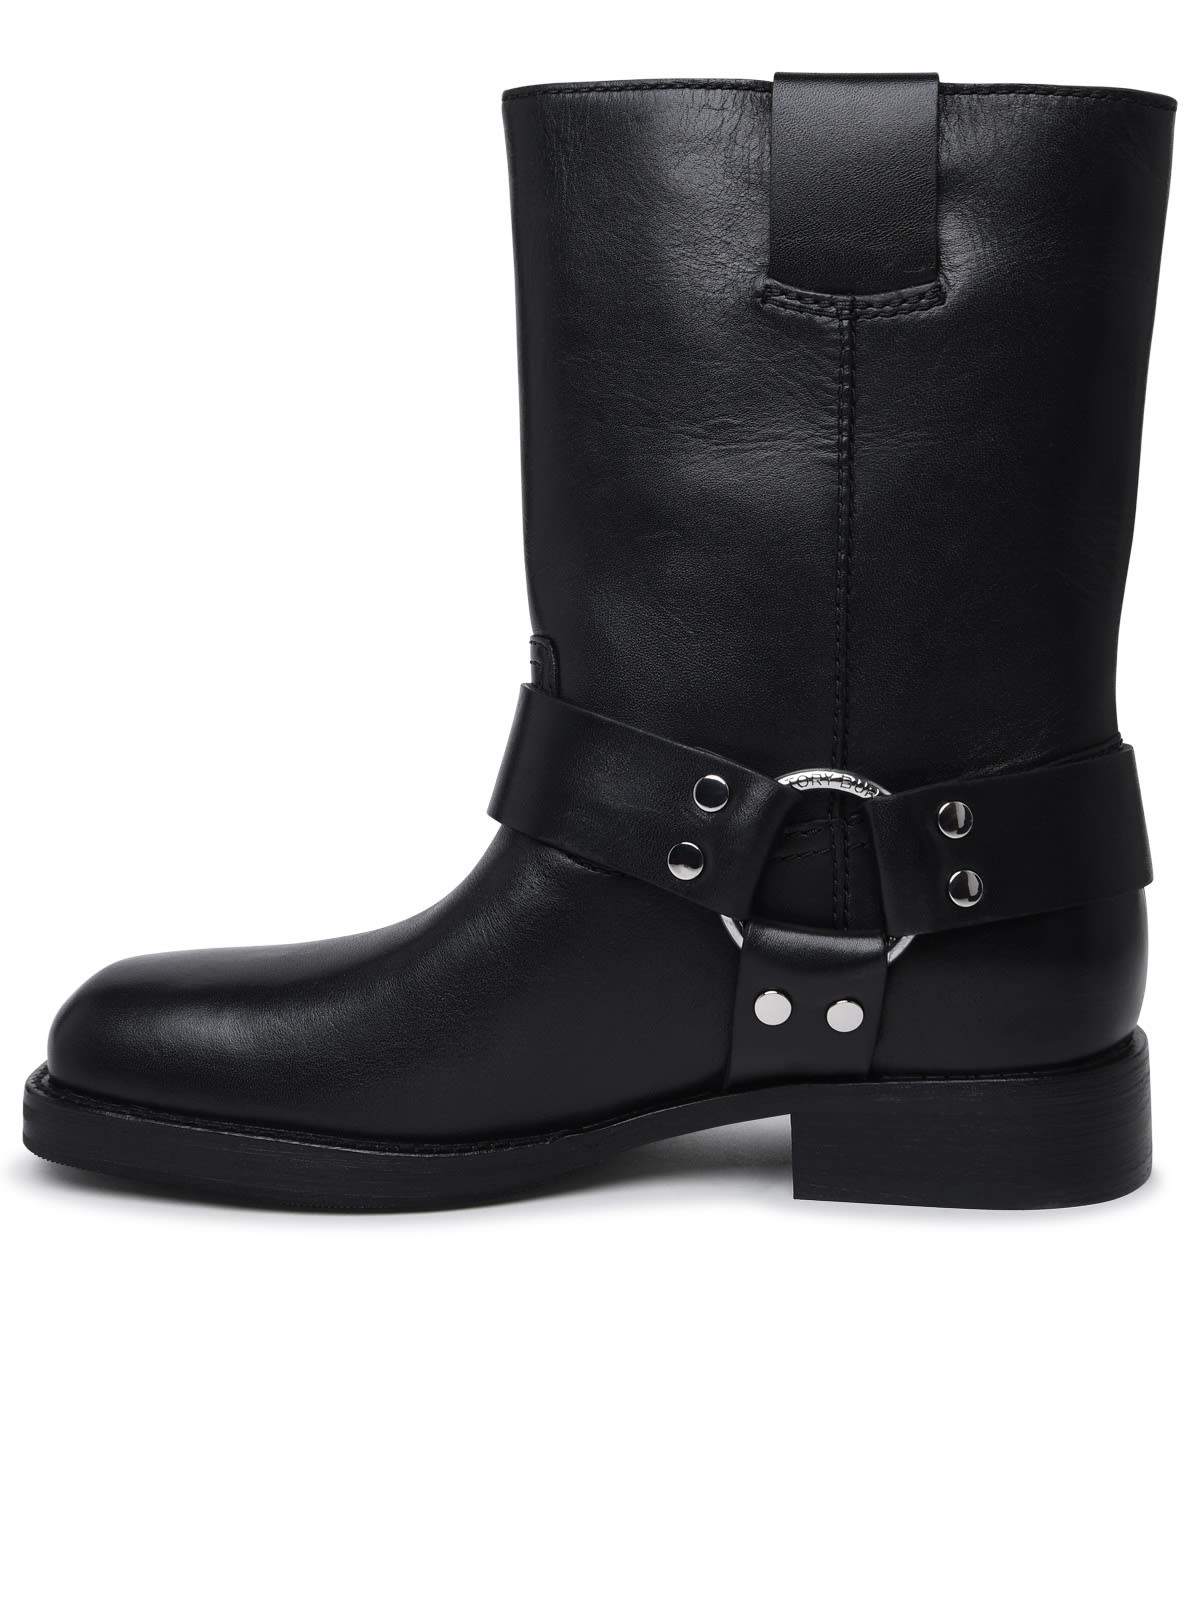 Shop Tory Burch Moto Black Leather Boots